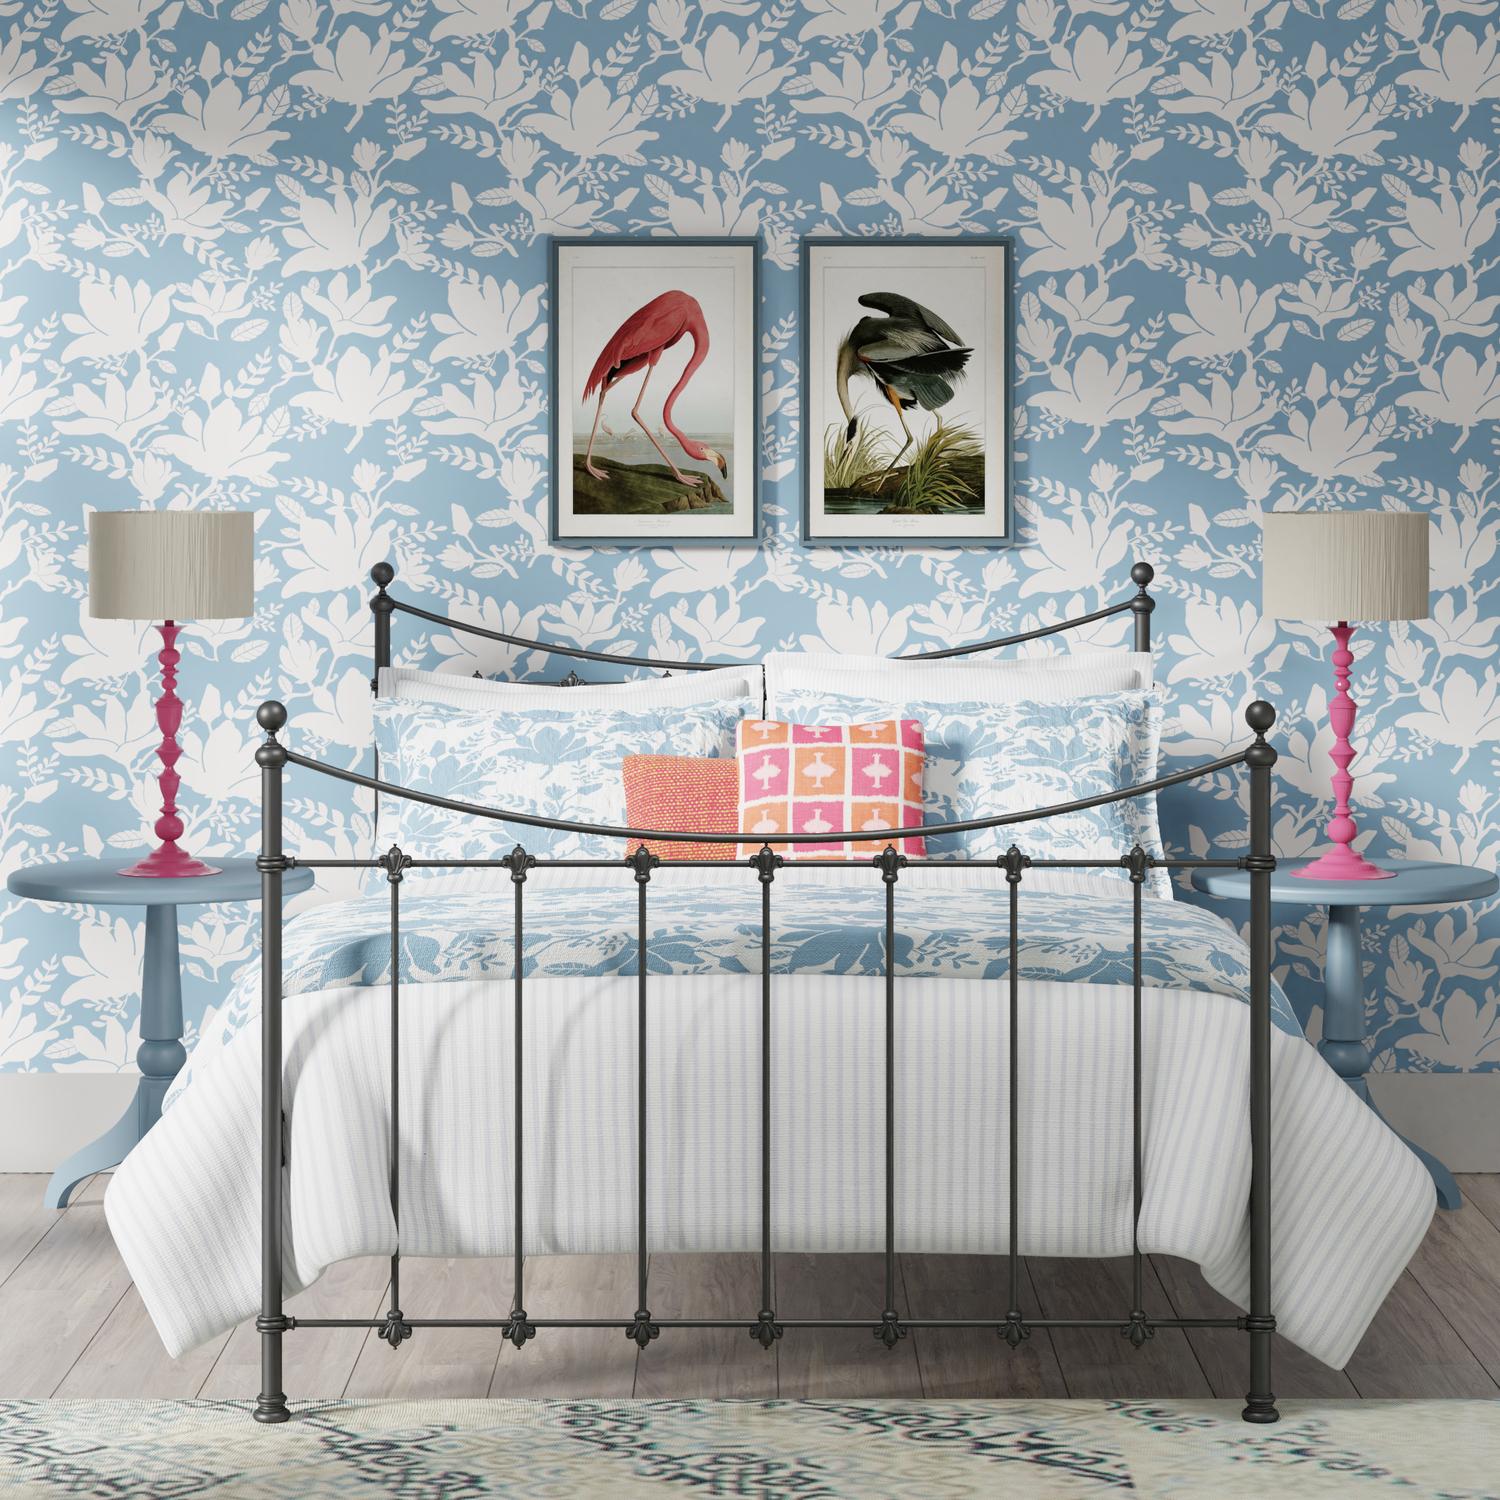 Chatsworth iron bed - Black iron bed in a blue bedroom